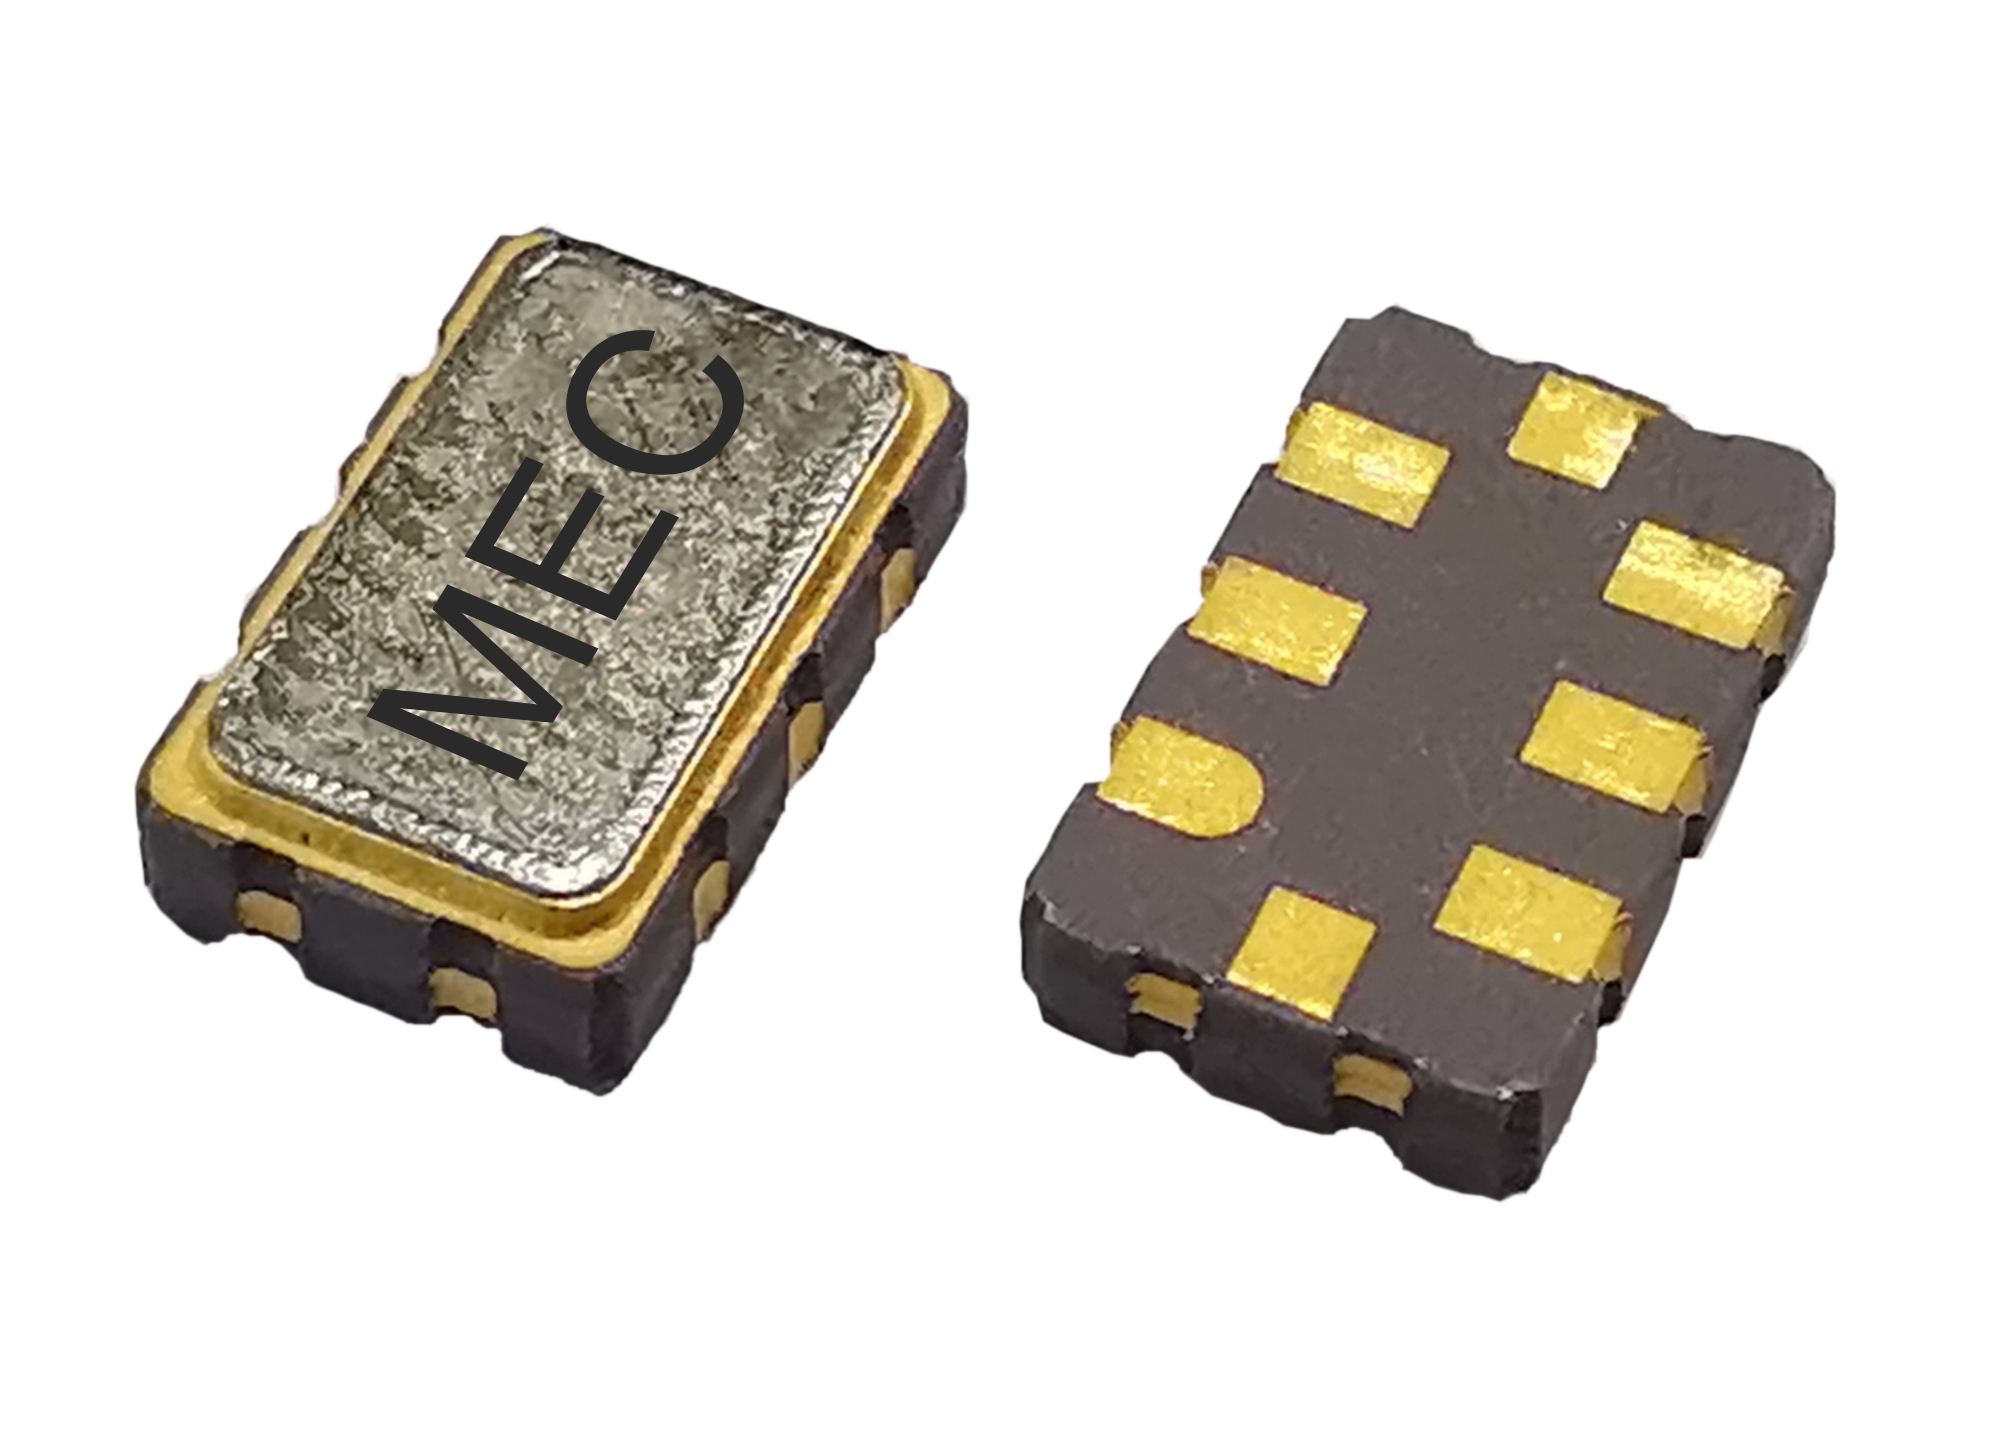 GQJF538 5032 3.3V Ultra Low Jitter Quick-turn Programmable Differential CML SMD Voltage Controlled Crystal Oscillator